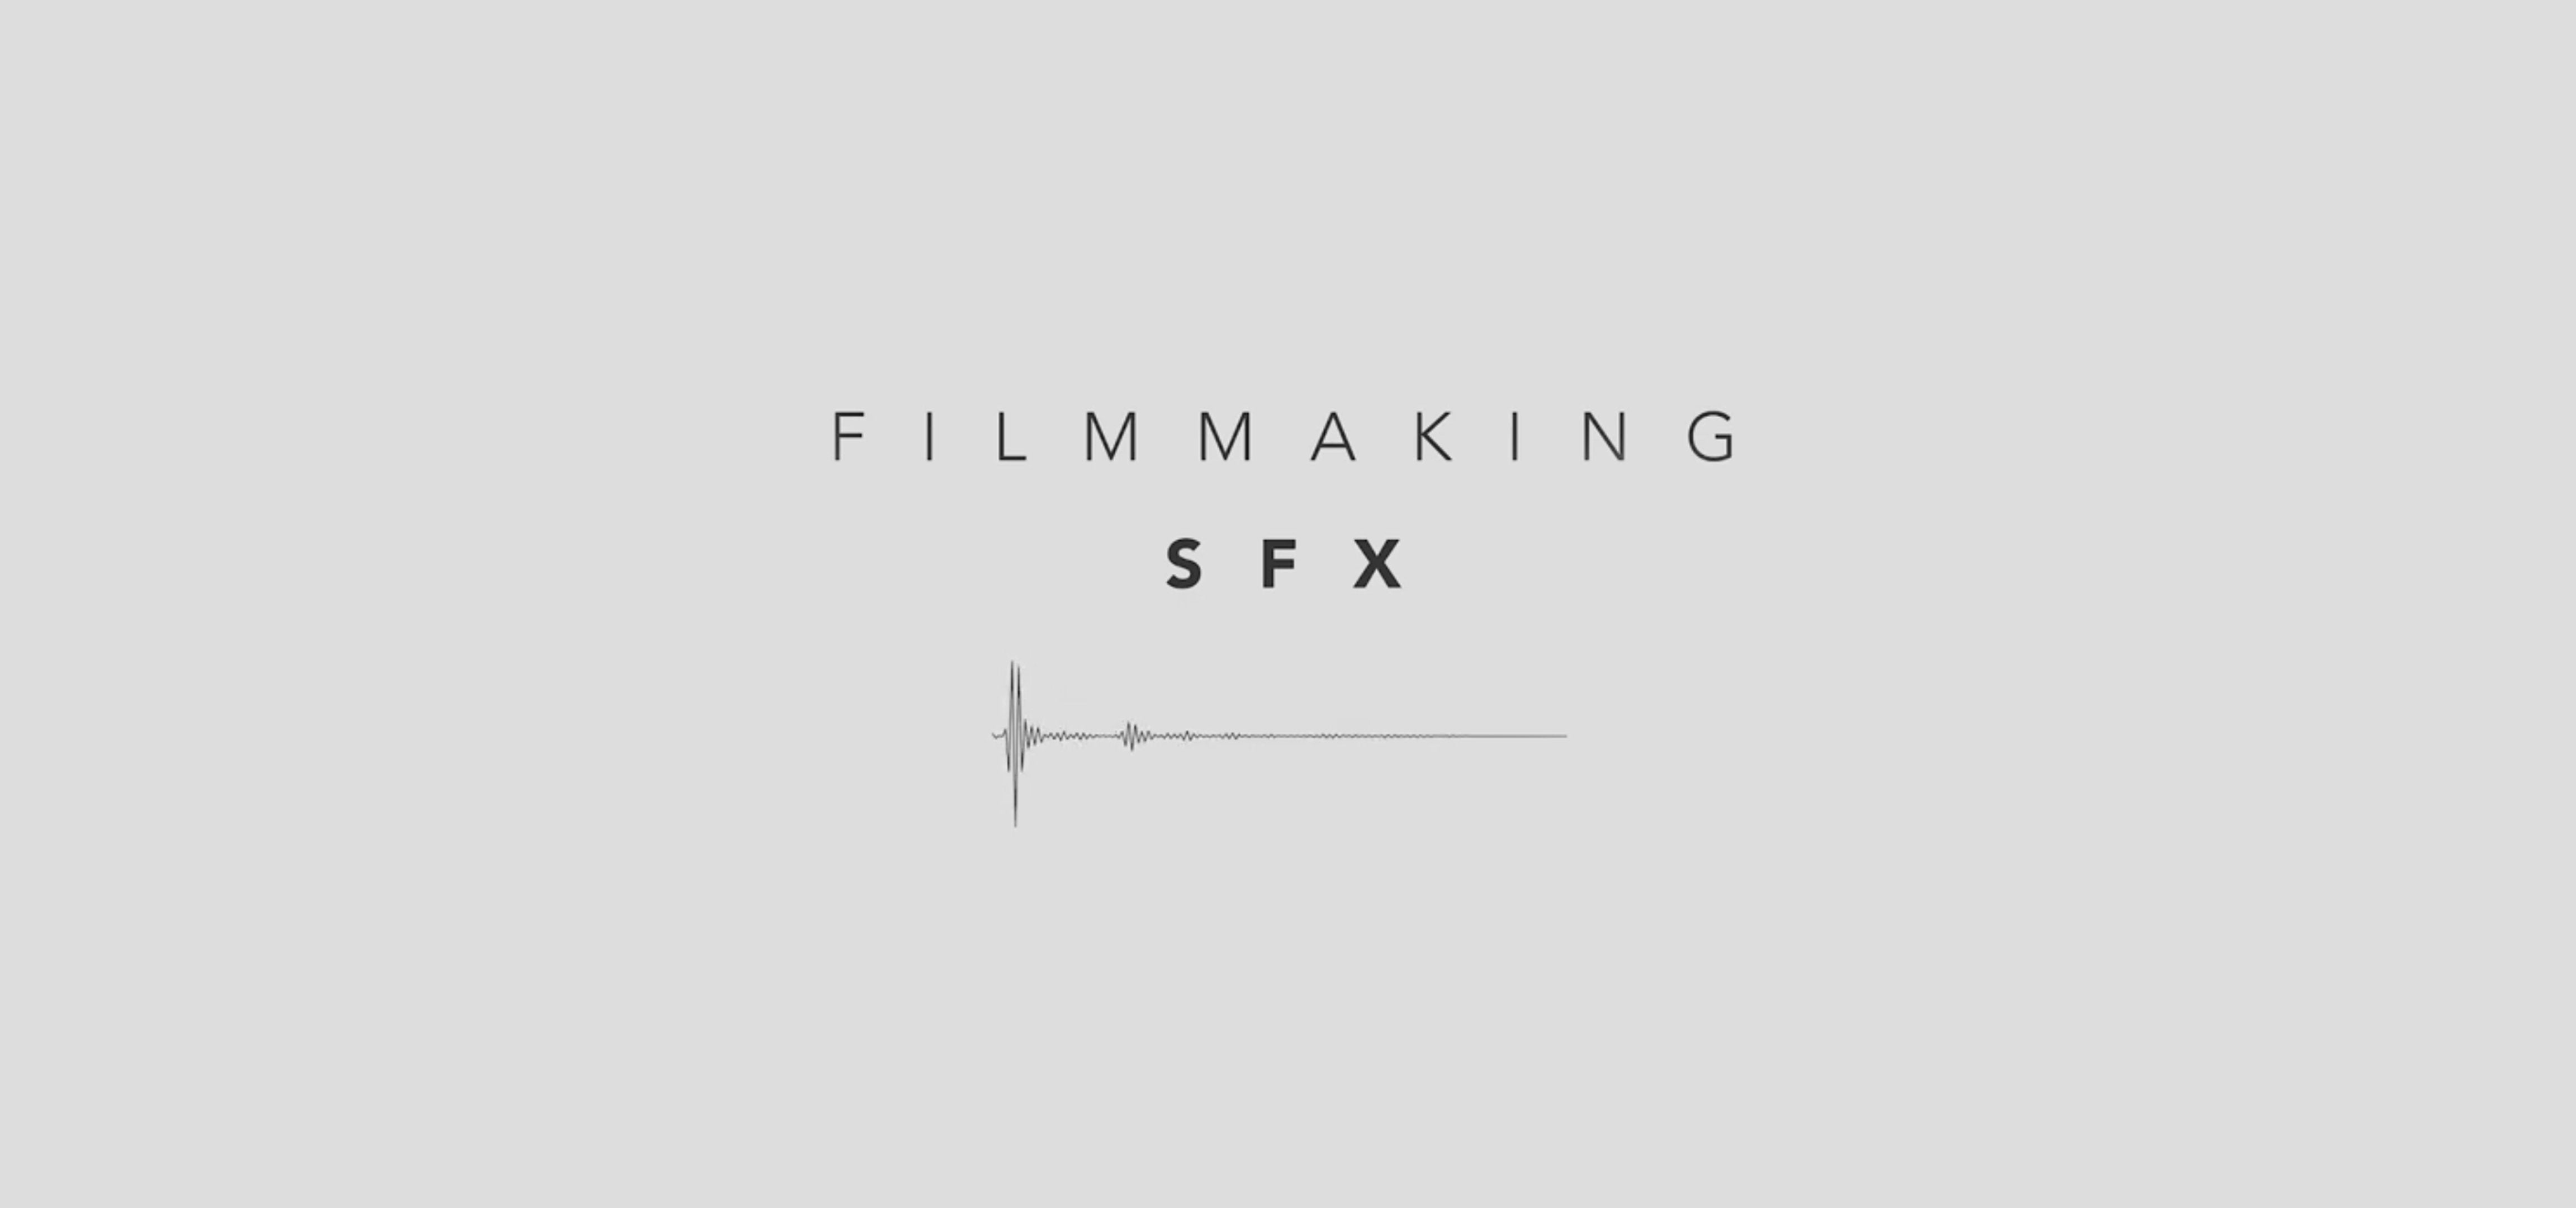 Top 4 Sound Effects for Filmmaking